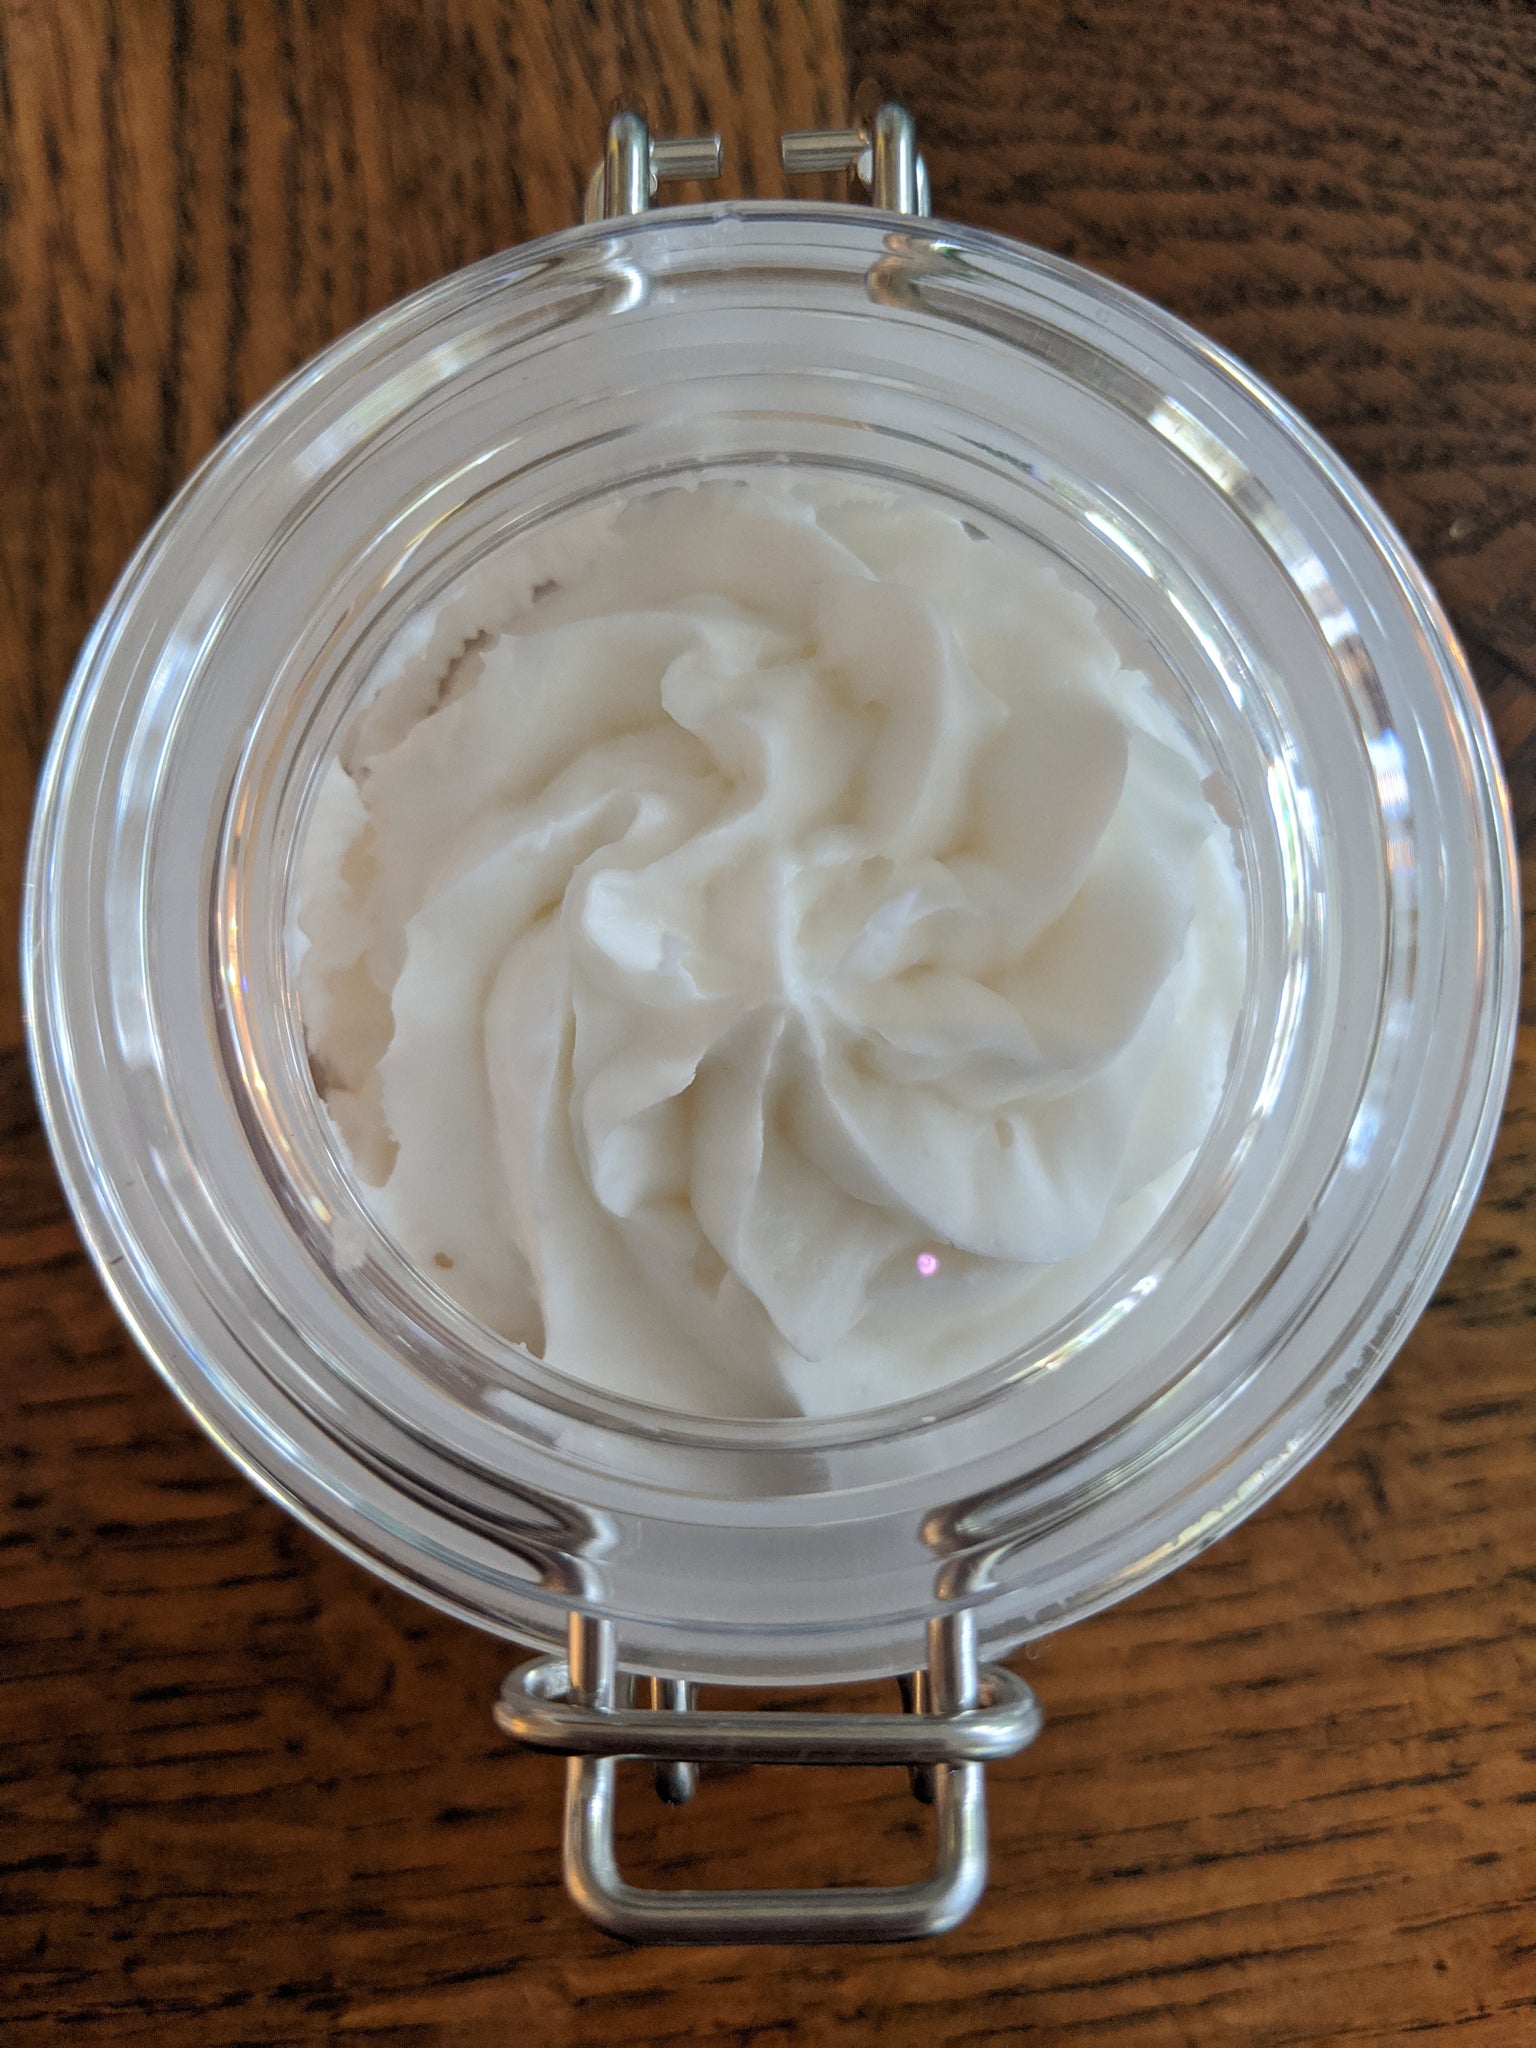 Unscented Artisan Body Butter | All The Way Handmade | Handmade Body Butter | Artisan Made | Handmade Lotion | Small Business